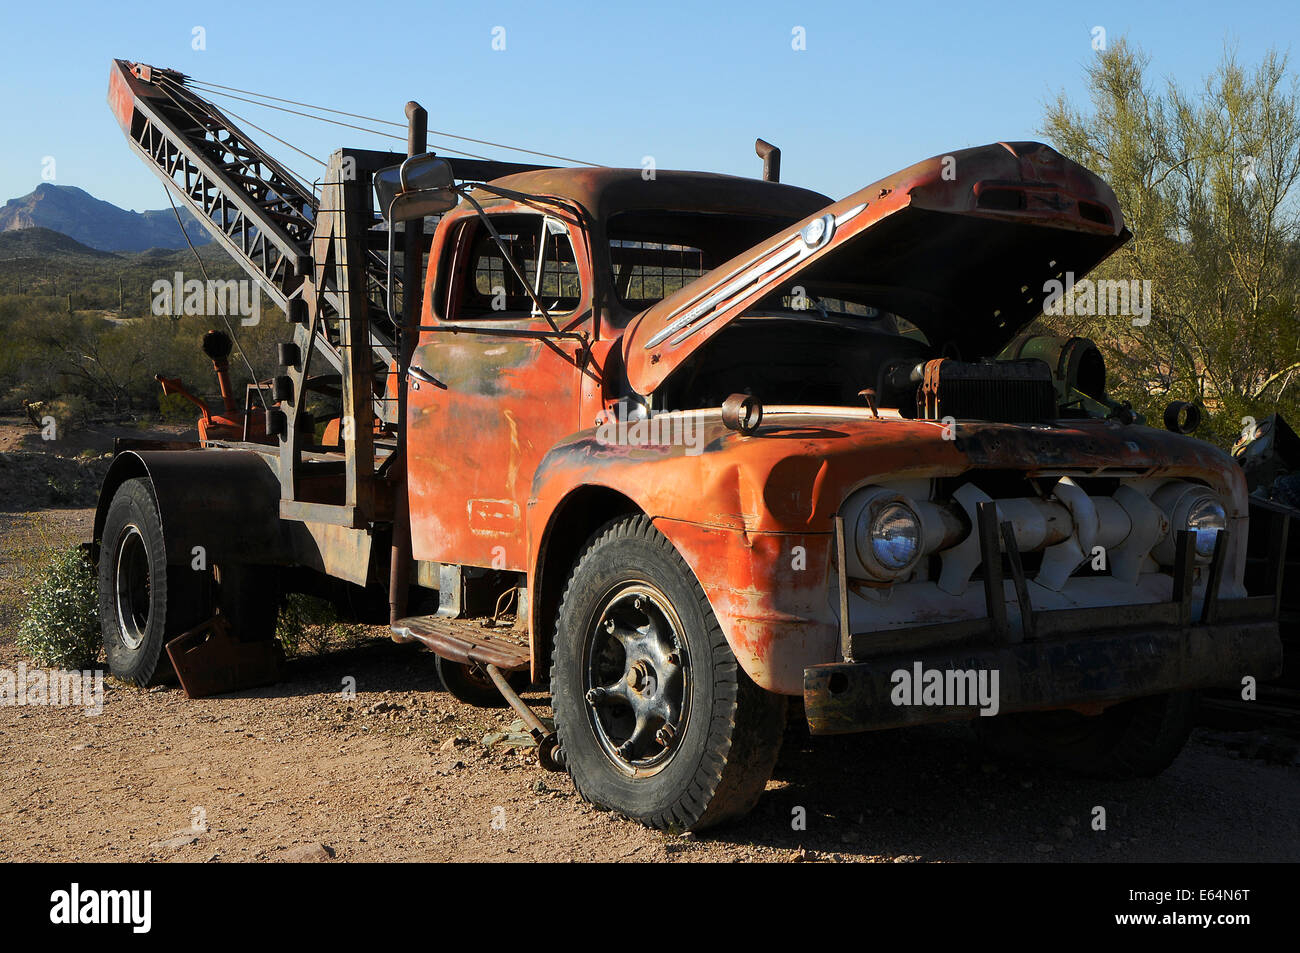 Abandoned Old Broken Down Tow Truck in Goldfield Ghost Town, Apache Junction, Arizona Stock Photo